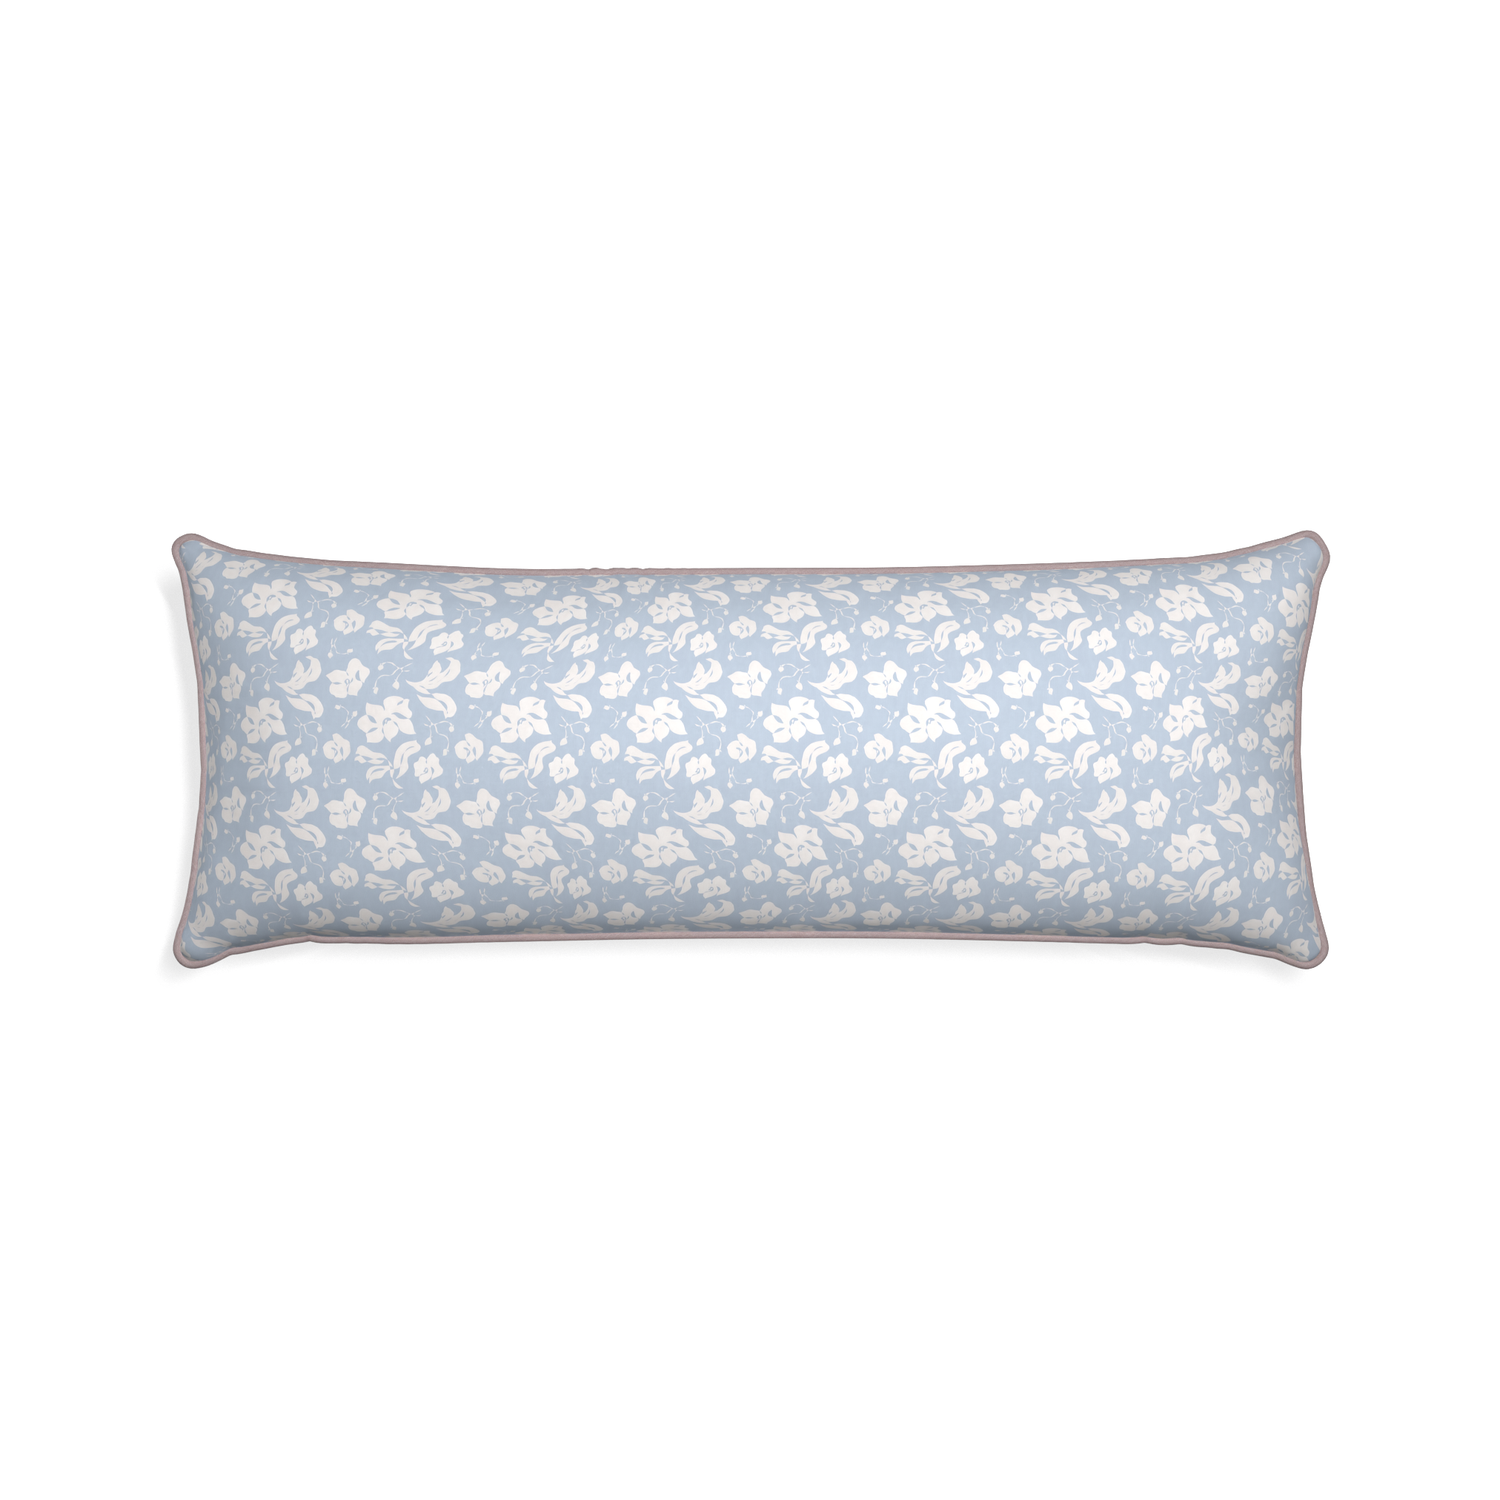 Xl-lumbar georgia custom cornflower blue floralpillow with orchid piping on white background